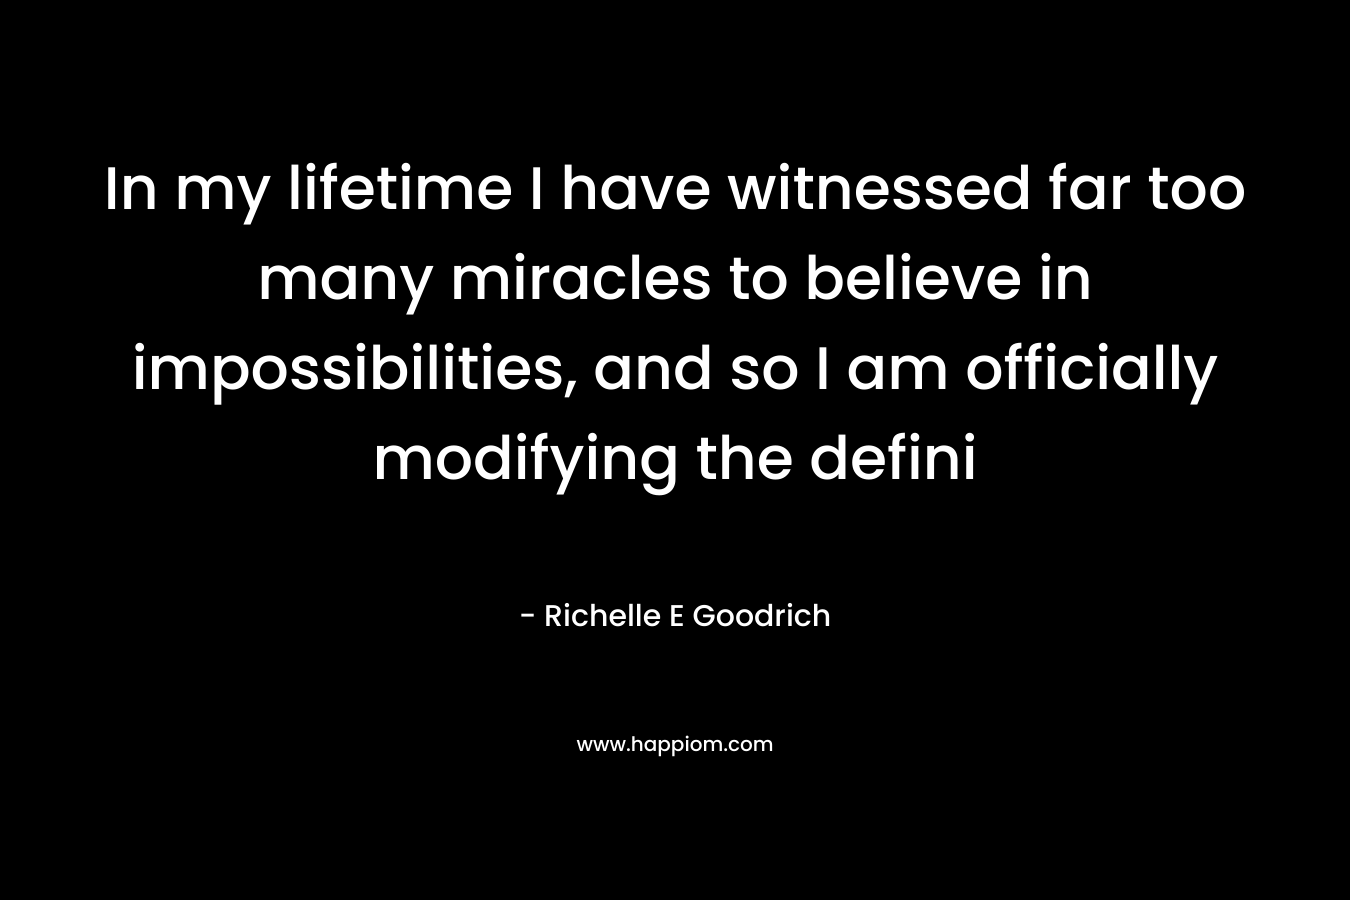 In my lifetime I have witnessed far too many miracles to believe in impossibilities, and so I am officially modifying the defini – Richelle E Goodrich